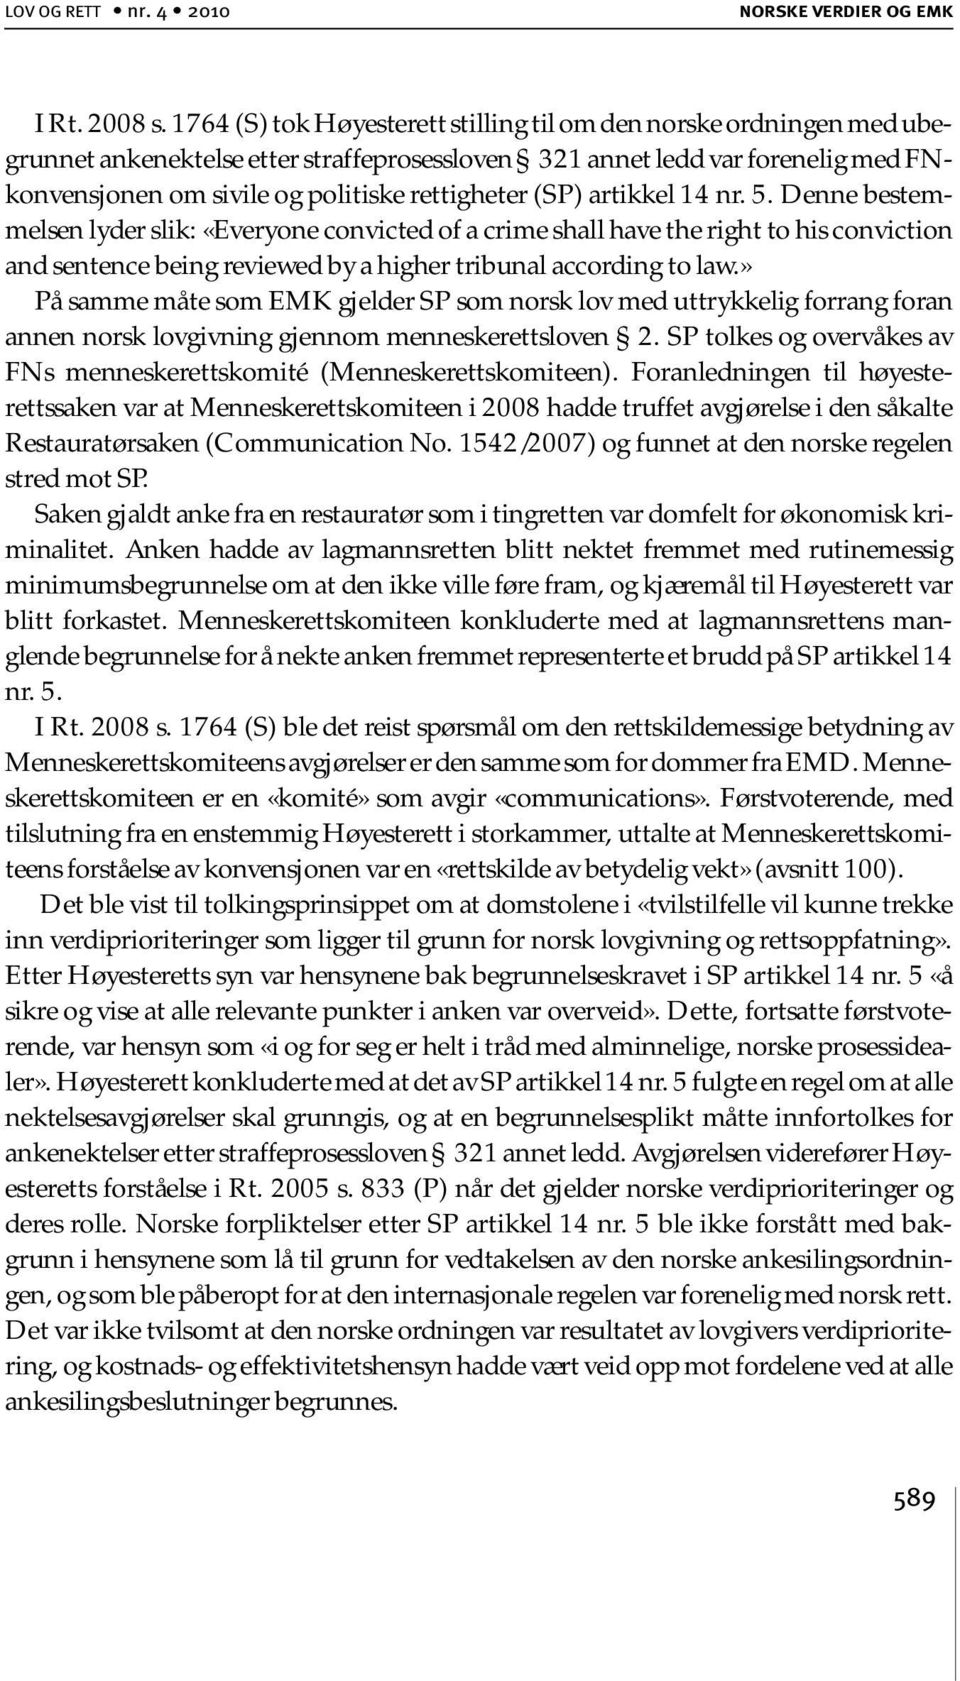 (SP) artikkel 14 nr. 5. Denne bestemmelsen lyder slik: «Everyone convicted of a crime shall have the right to his conviction and sentence being reviewed by a higher tribunal according to law.